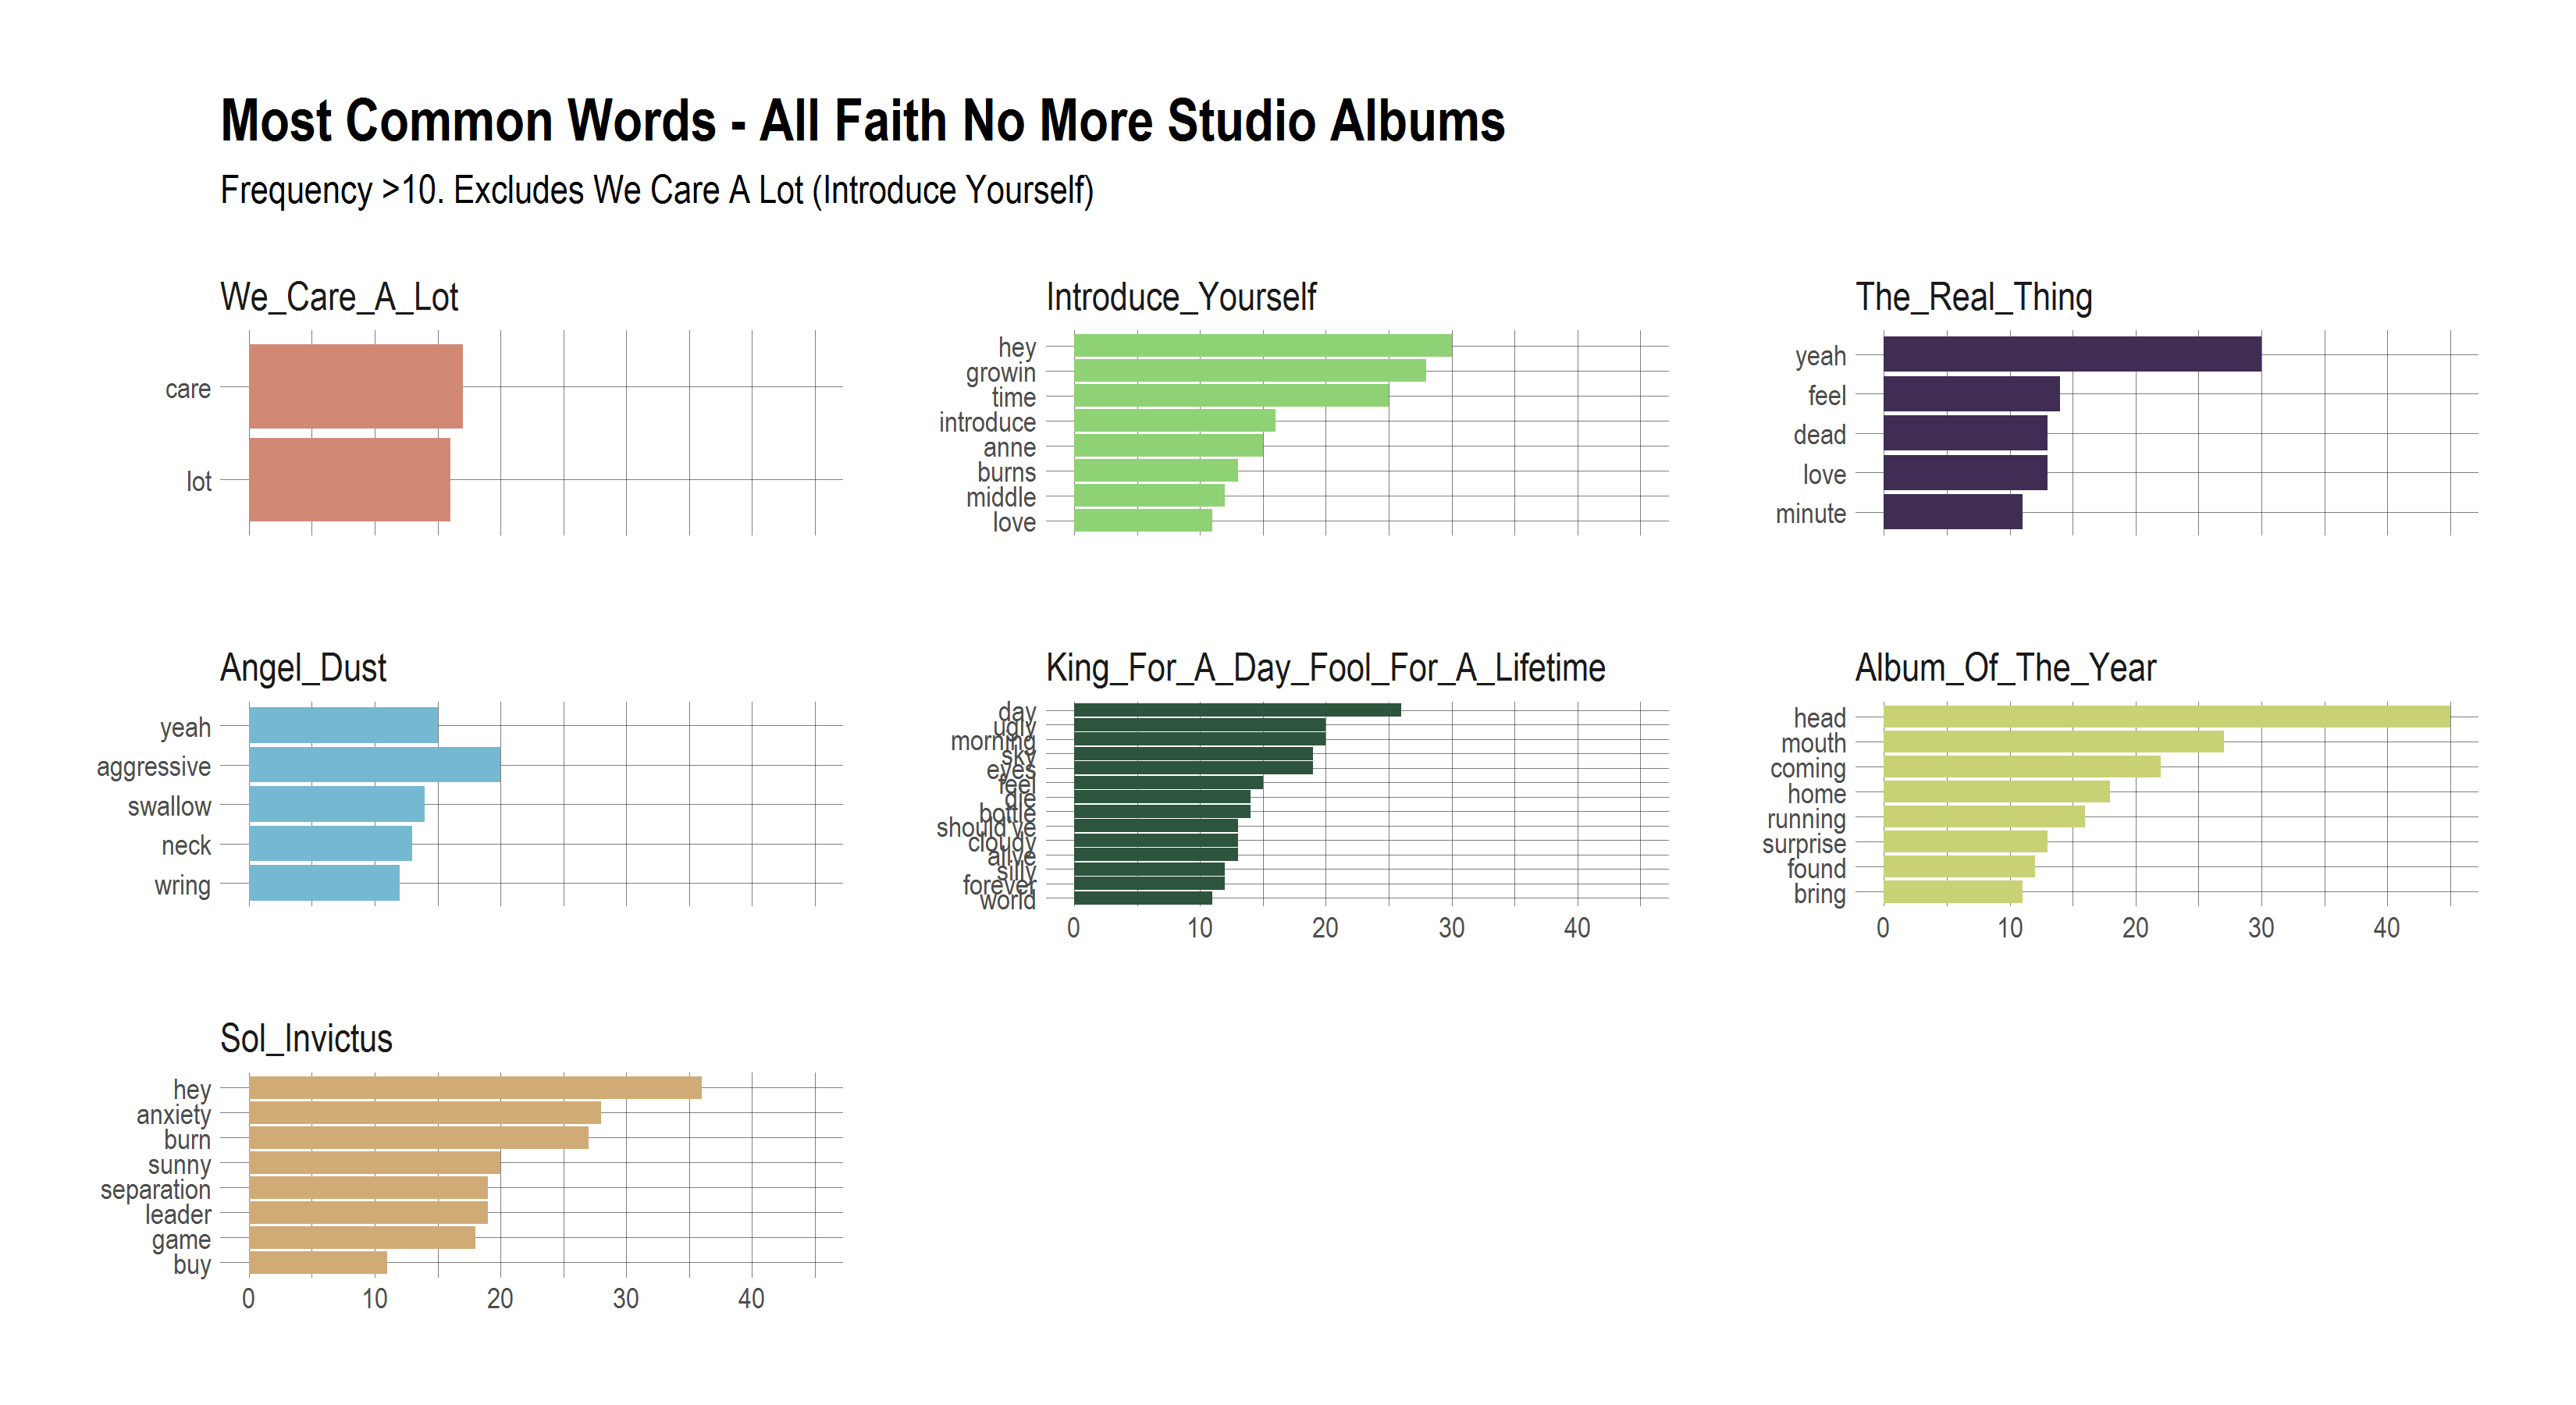 2017-10-22-Most-Common-Words-by-Album.png